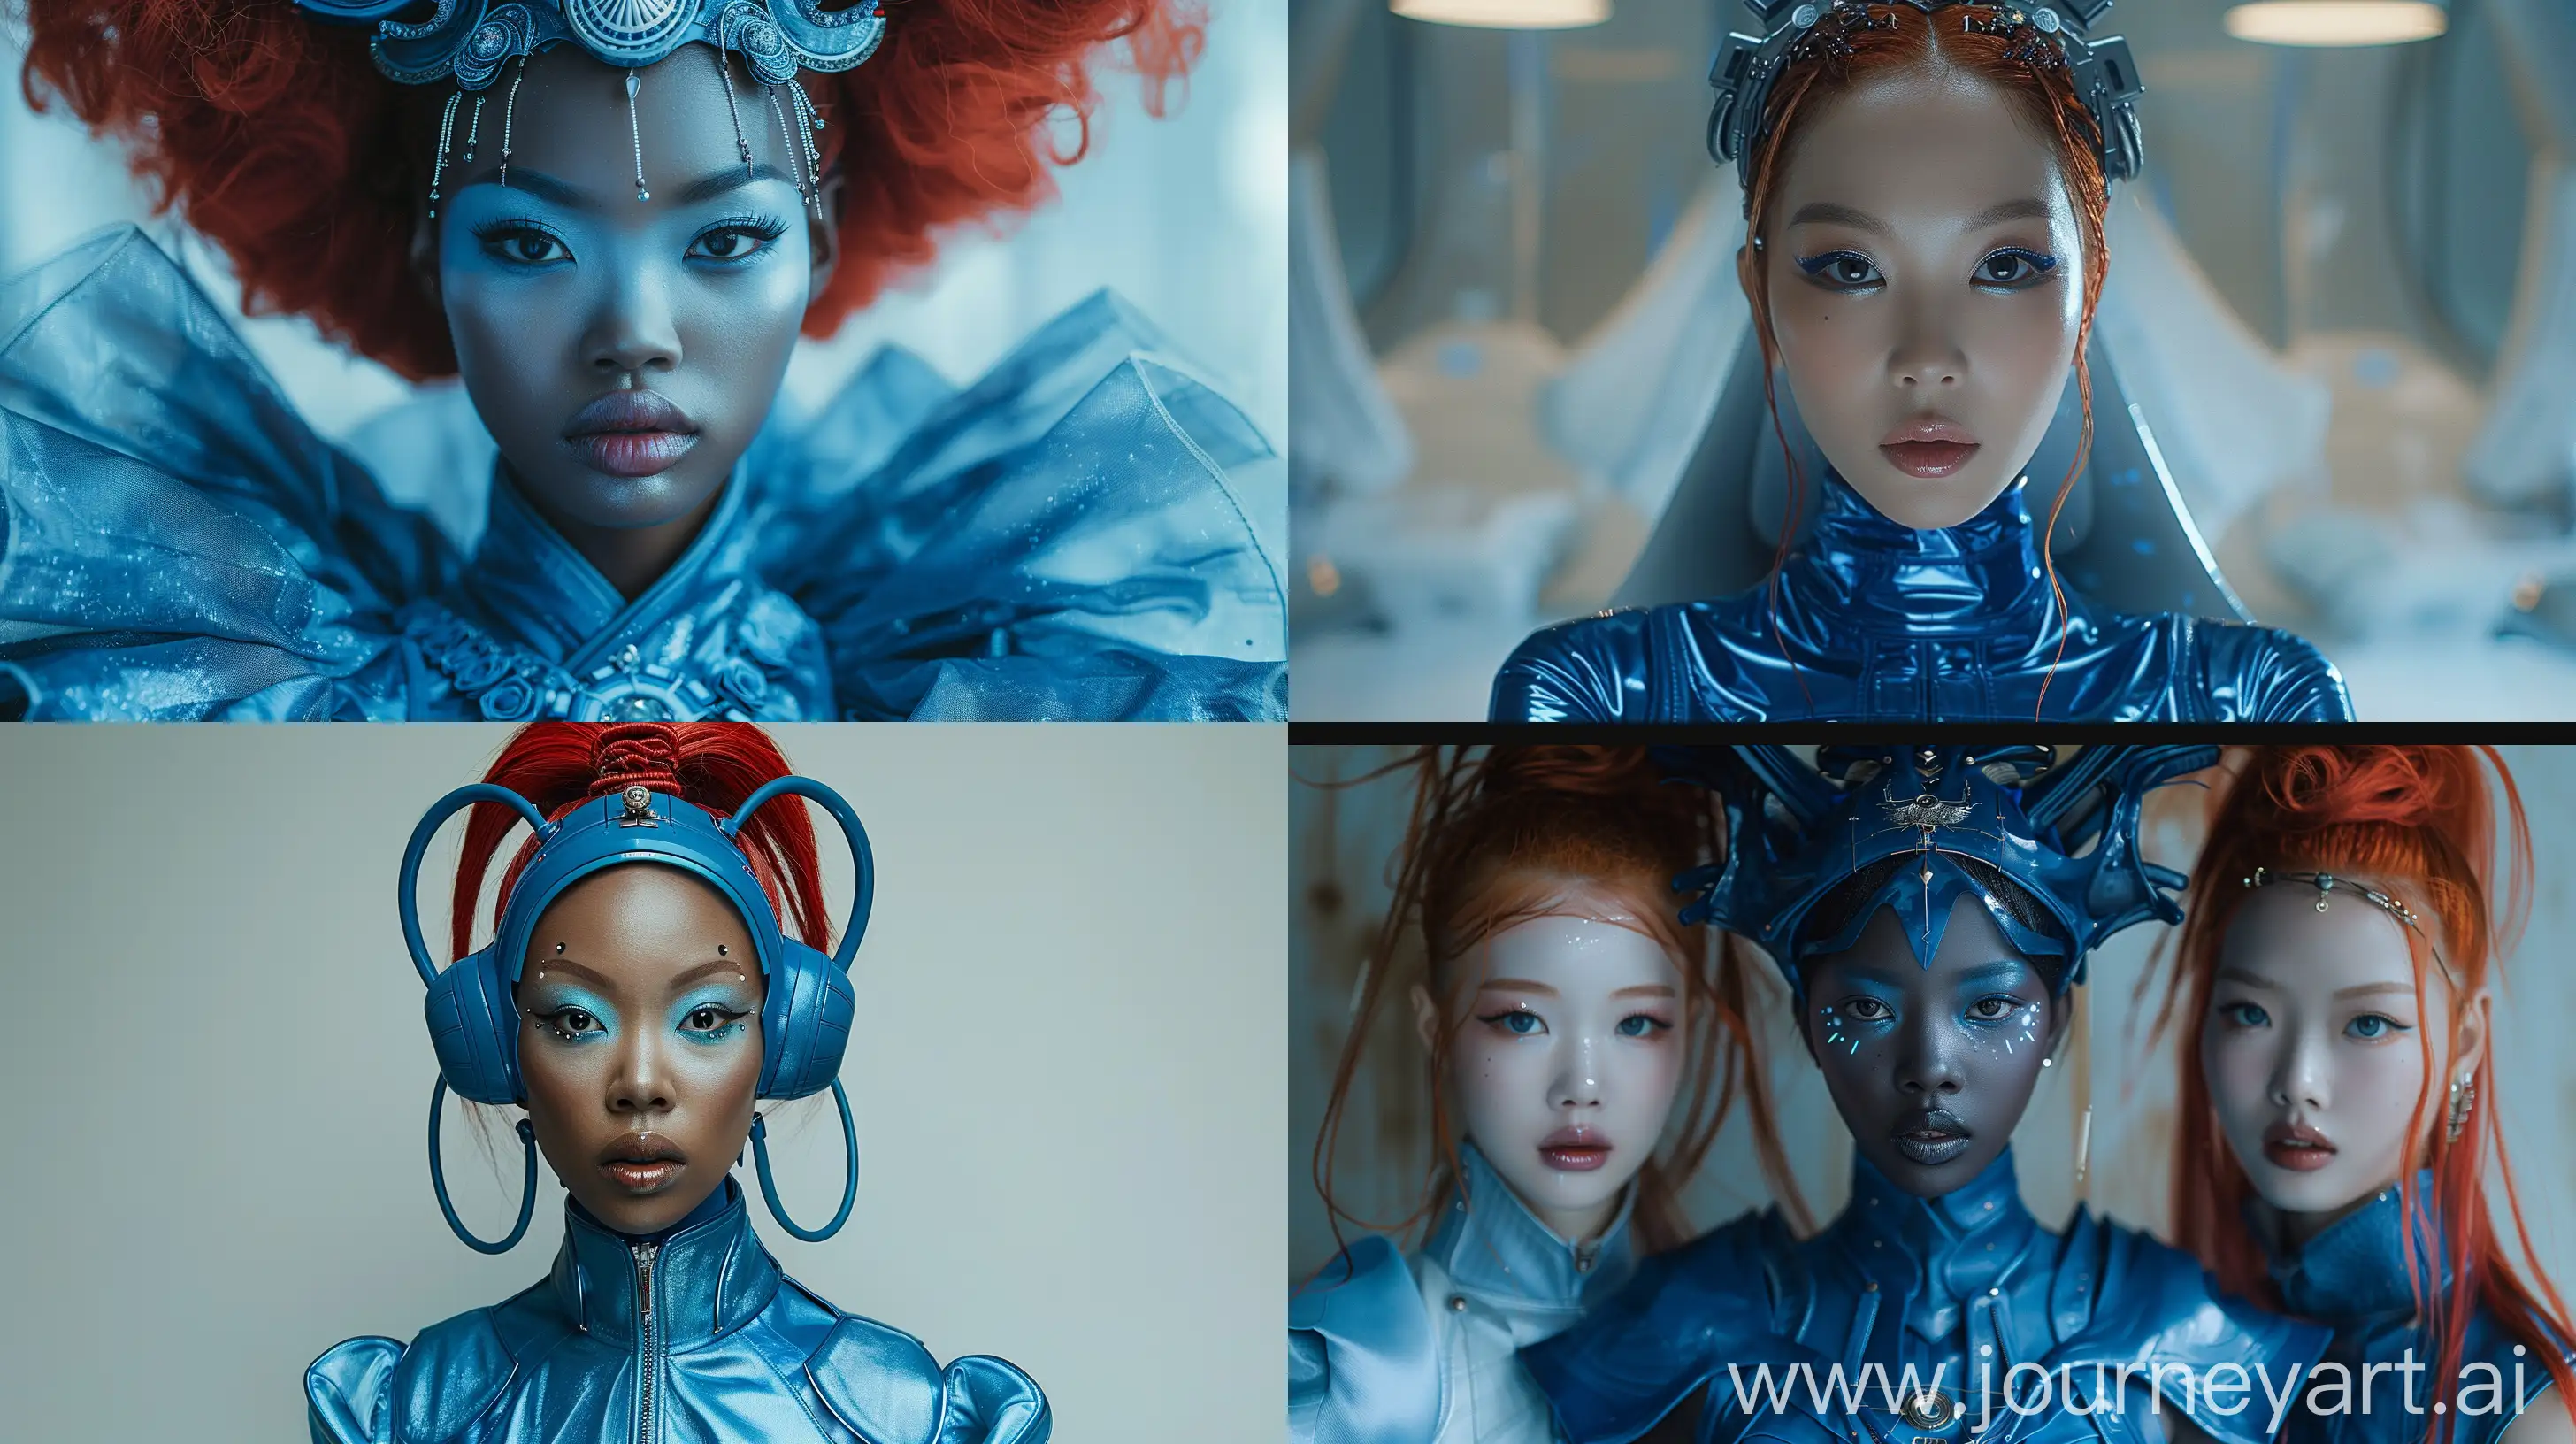 Futuristic-Kpop-Idol-in-Vivid-Blue-Outfit-with-Red-Hairpiece